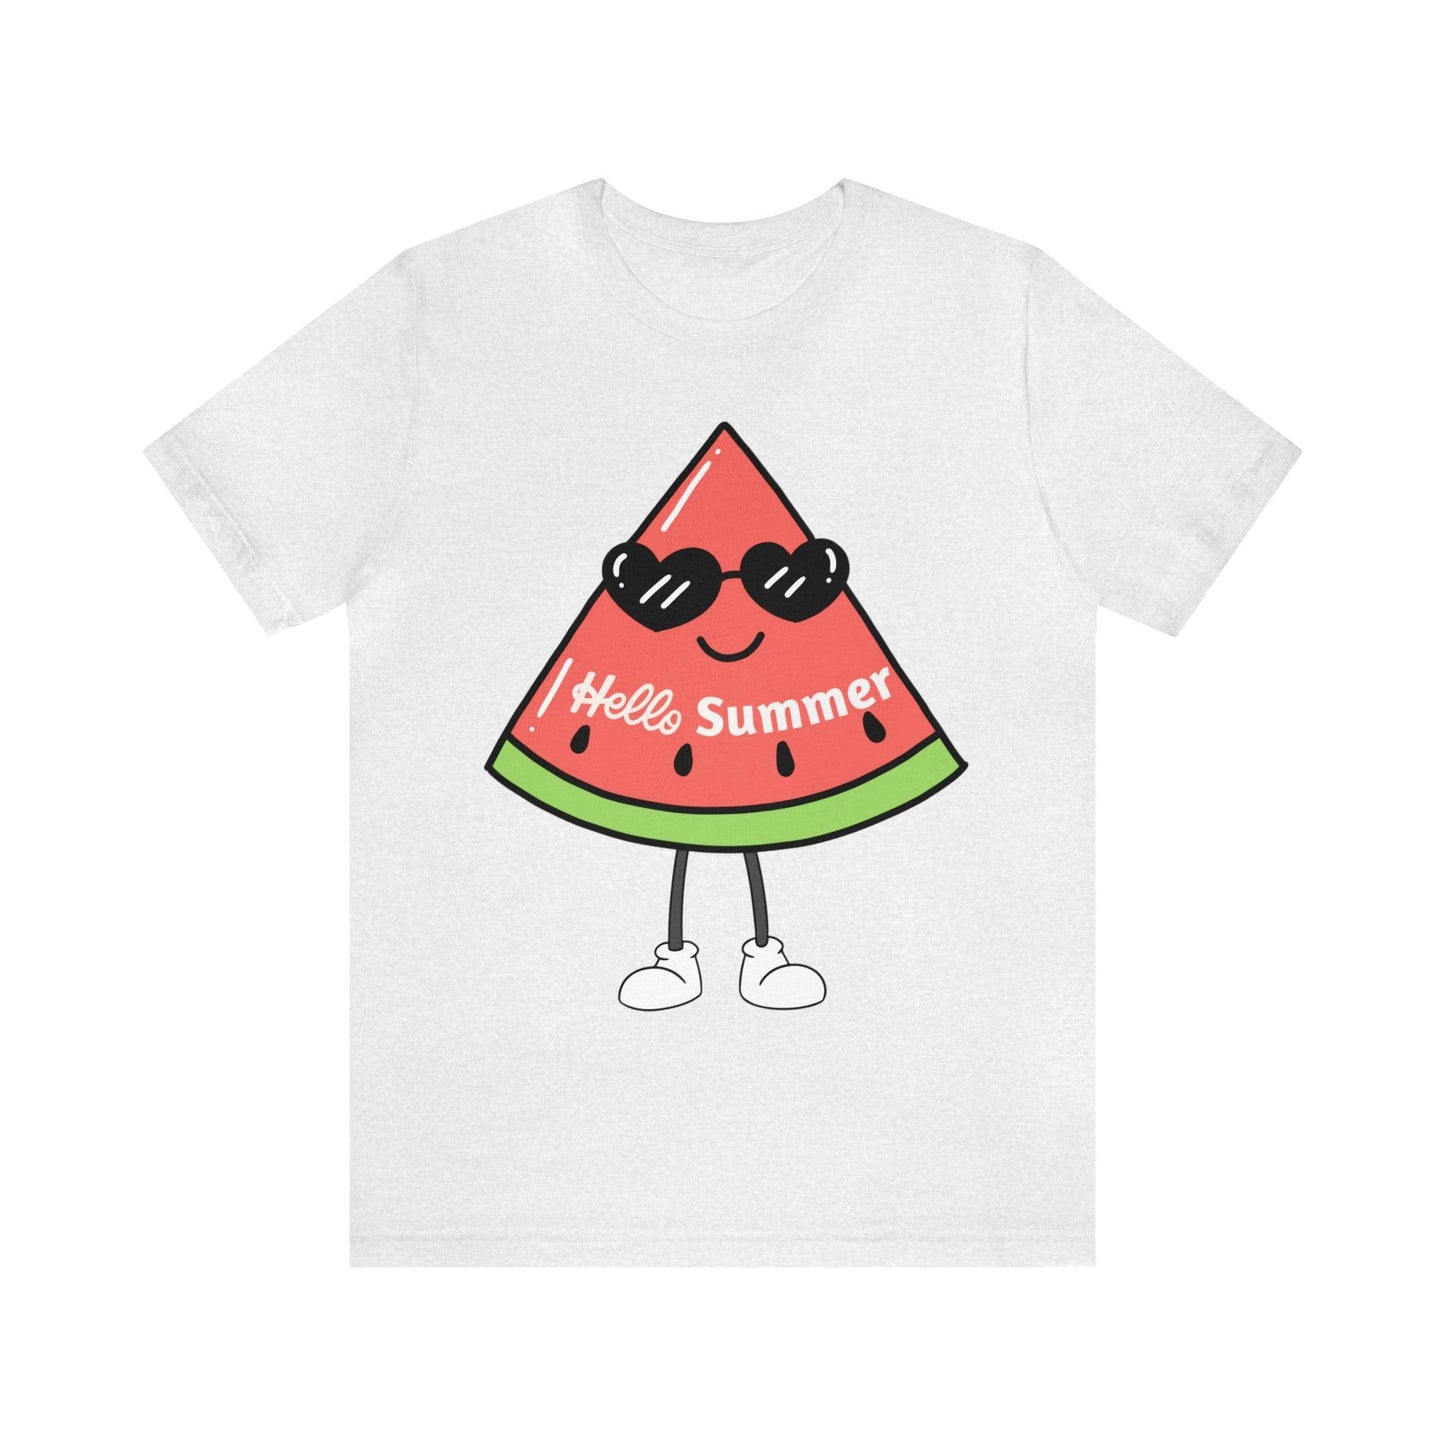 Funny Hello Summer Shirt, Summer shirts for women and men, Summer Casual Top Tee - Giftsmojo